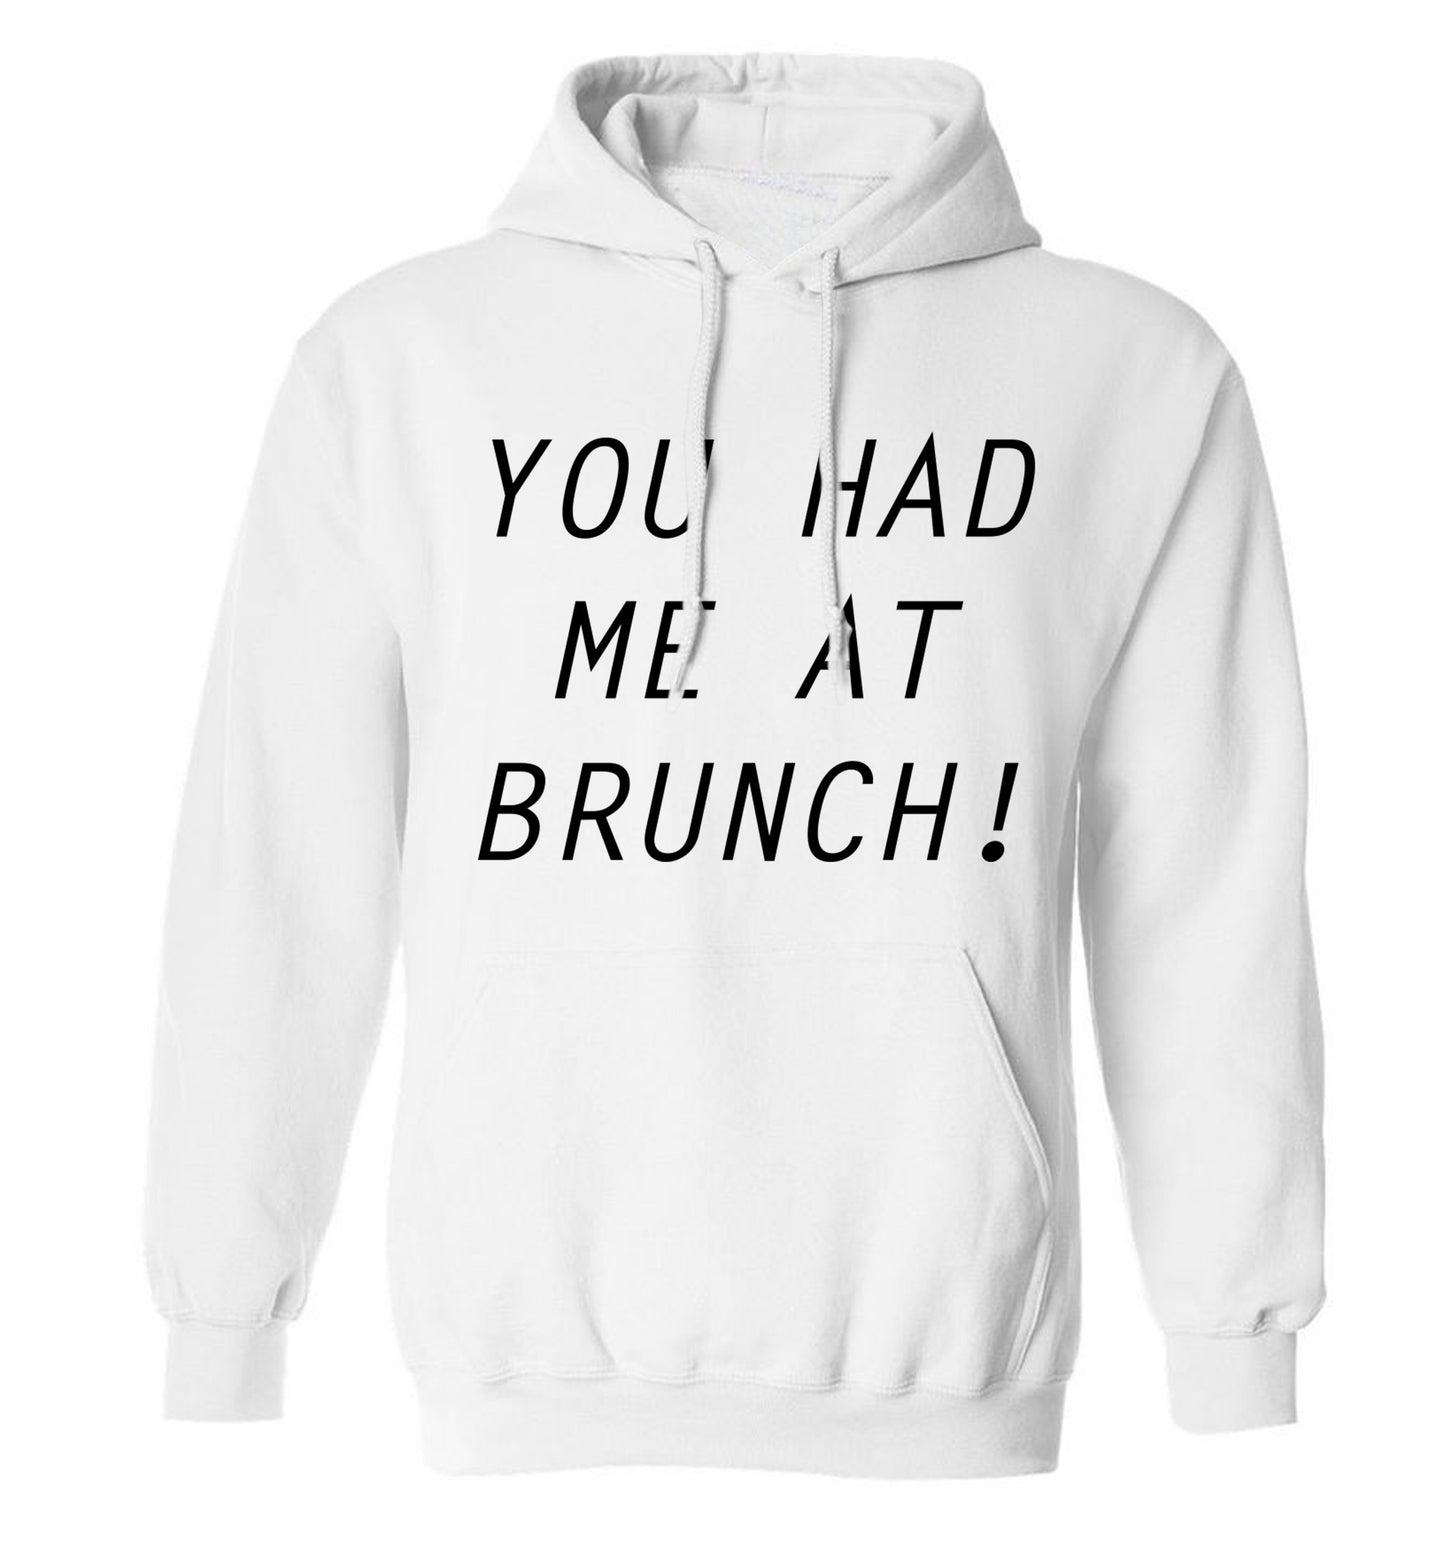 You had me at brunch adults unisex white hoodie 2XL